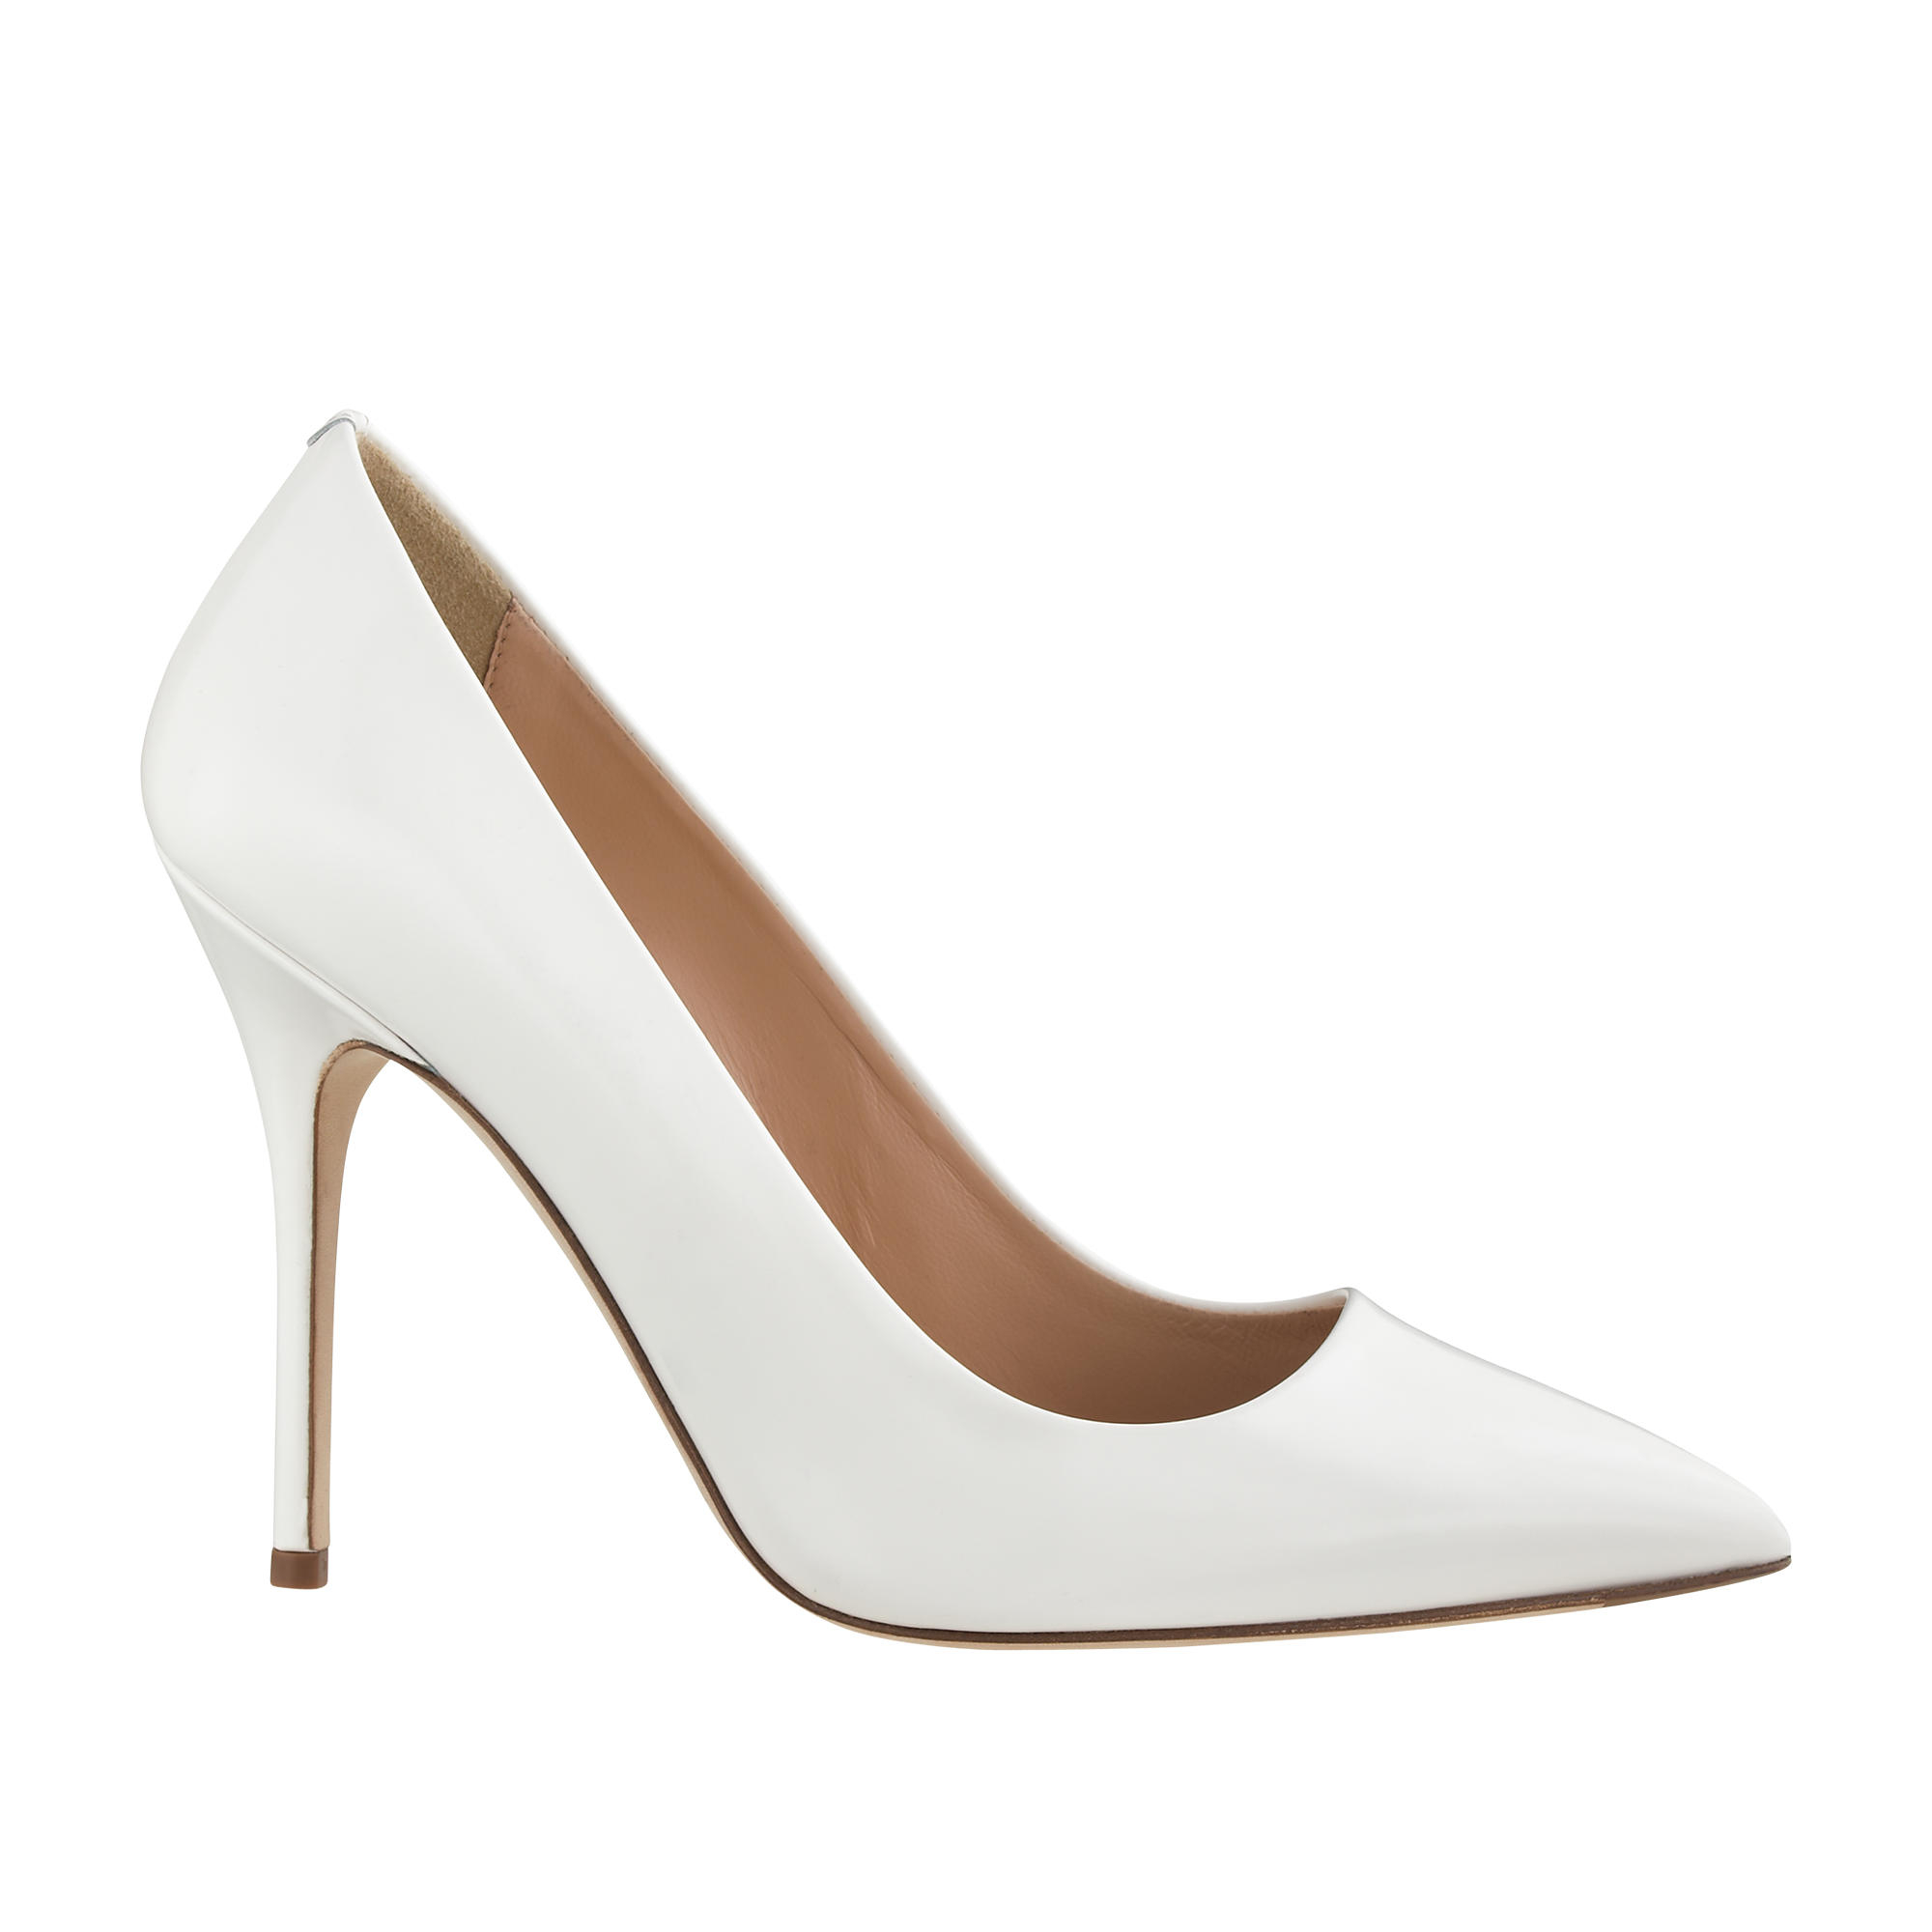 J.Crew Roxie Glossy Leather Pumps in 